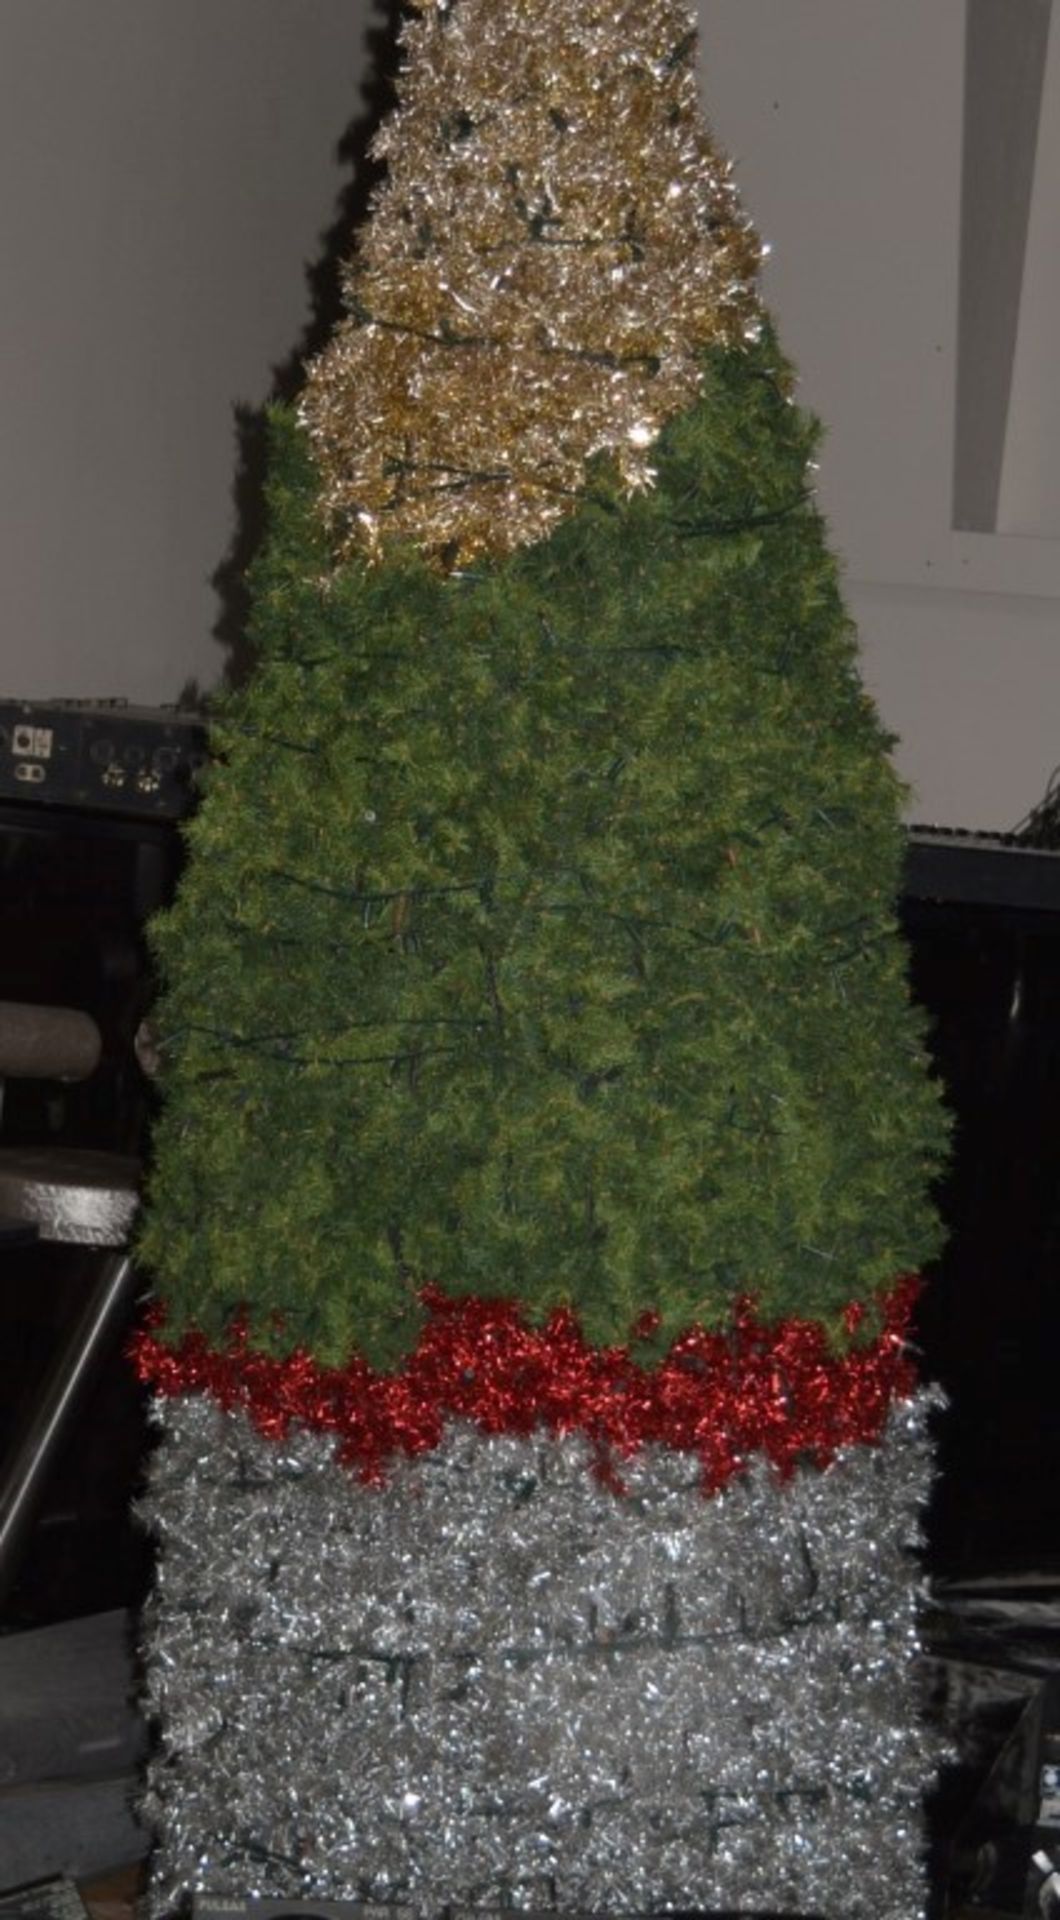 1 x Giant WINE BOTTLE Shaped CHRISTMAS TREE - Stands Approx 9ft Tall - 80cm Diameter - HUGE SIZE - - Image 2 of 4